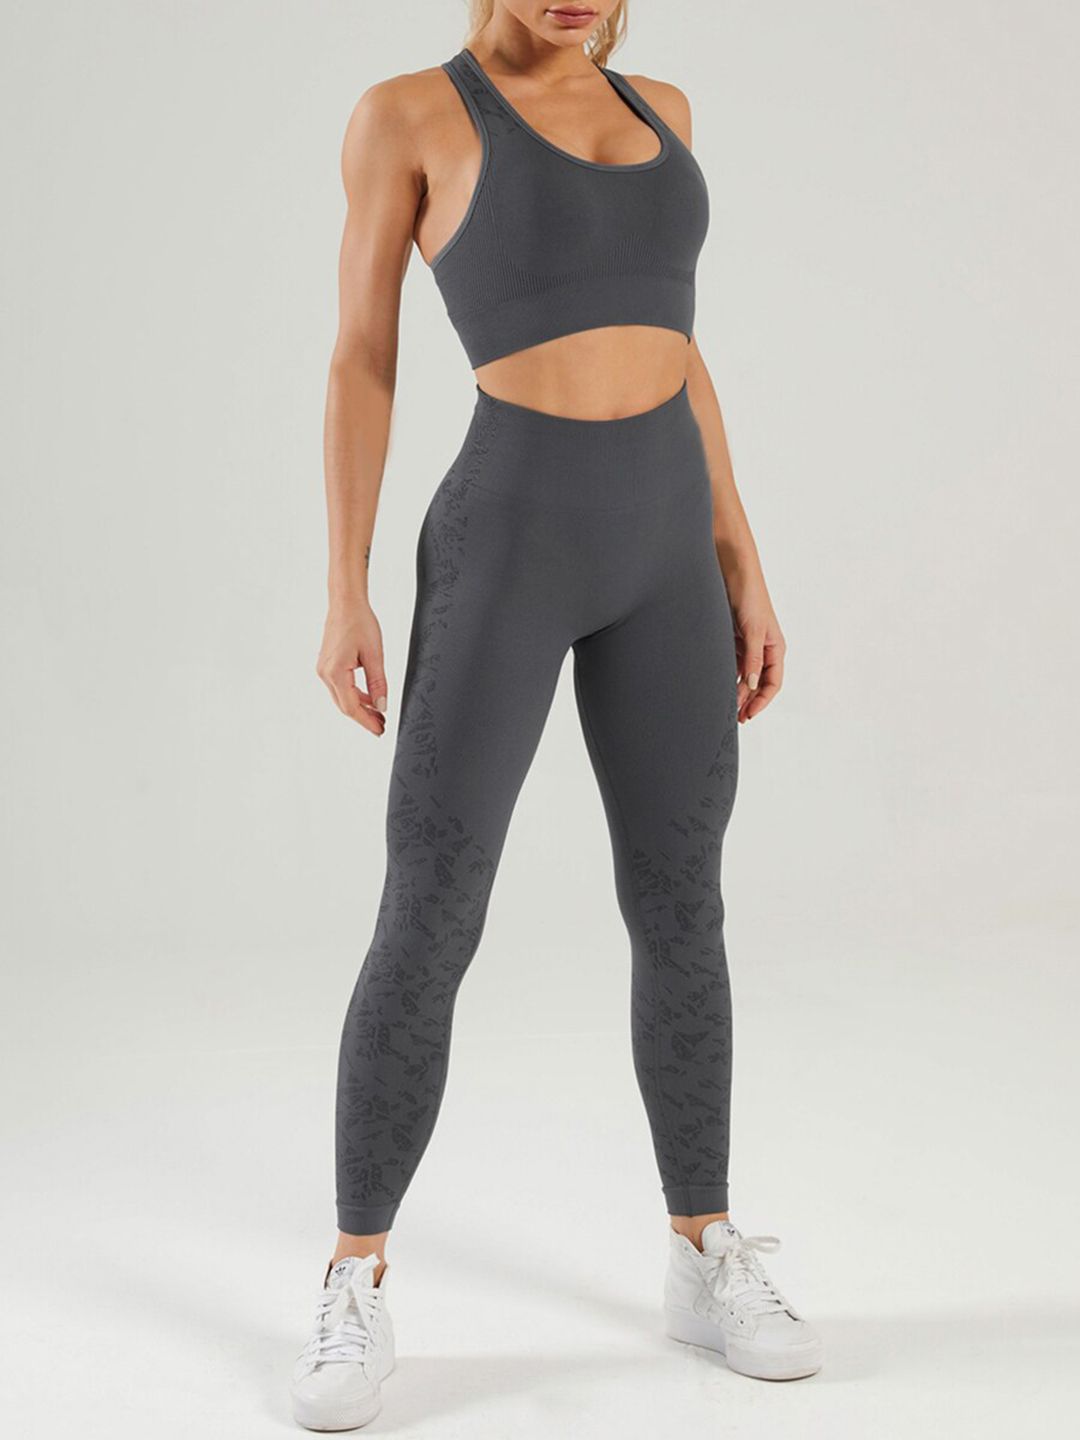 URBANIC Women Grey Solid Gym Track Suit Price in India